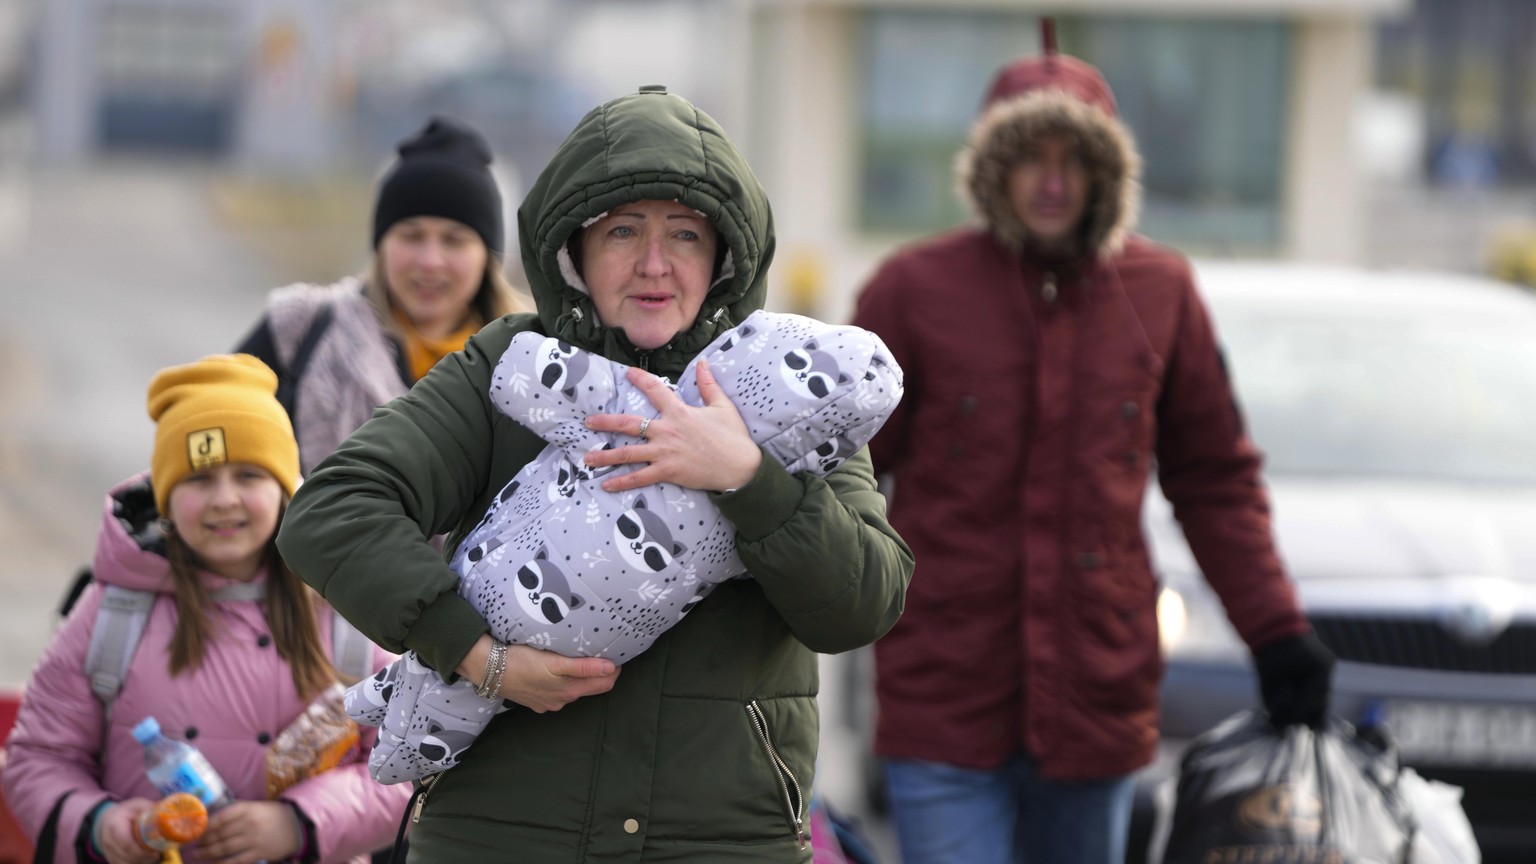 CAPTION CORRECTS DATE A family arrive at the border crossing in Medyka, Poland, Wednesday, March 2, 2022, after fleeing from the Ukraine. The U.N. refugee agency said Tuesday that around 660,000 peopl ...